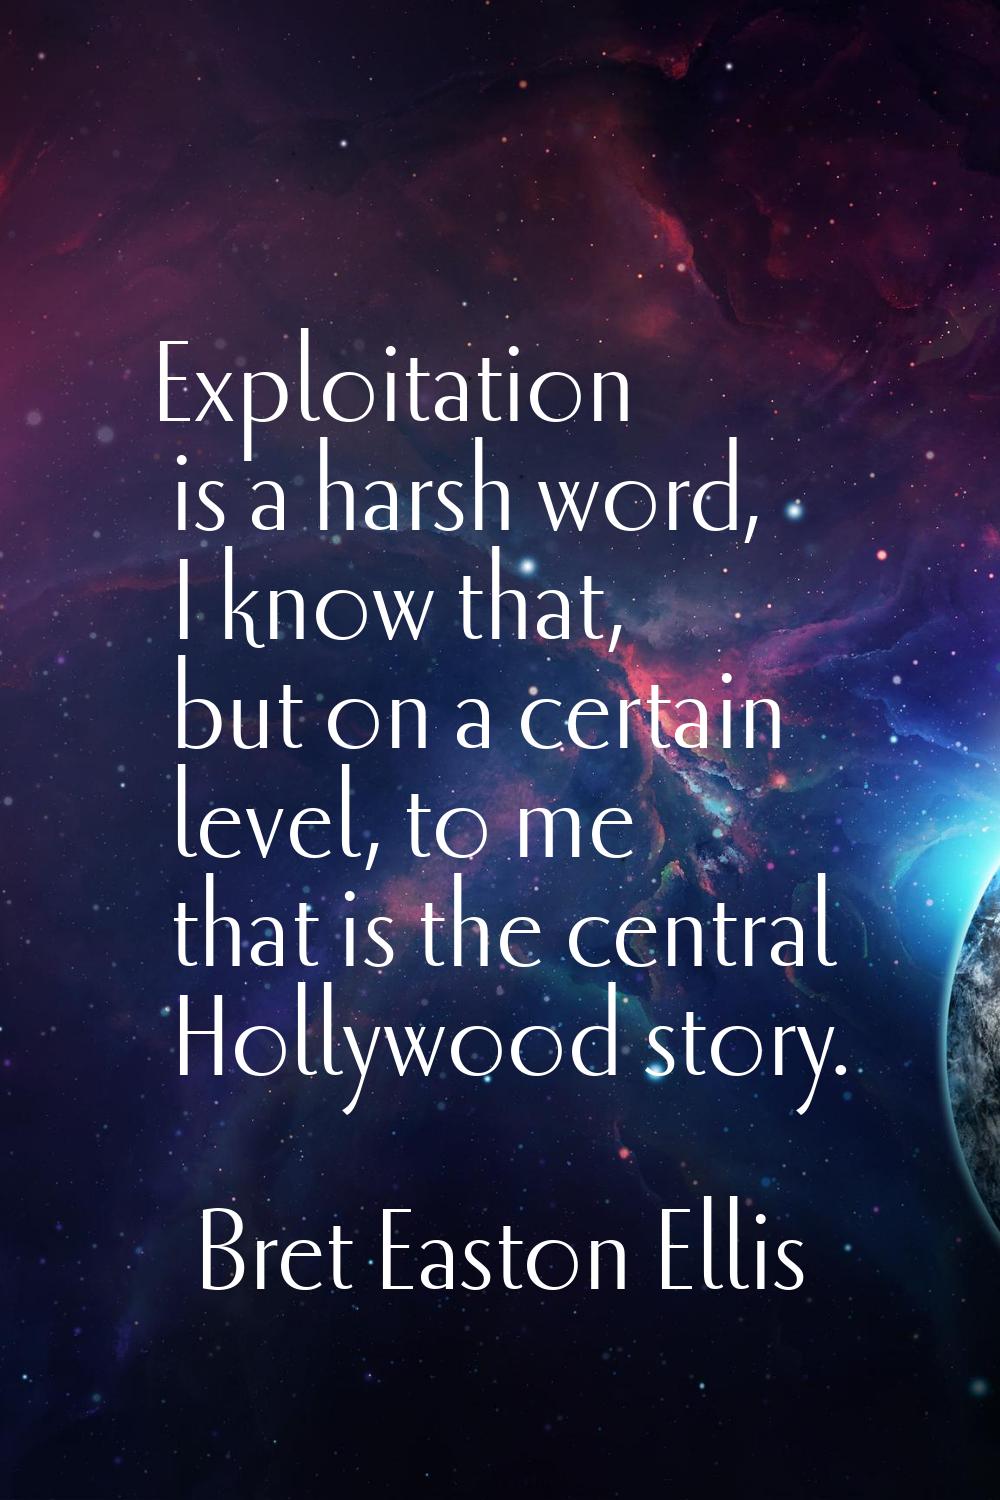 Exploitation is a harsh word, I know that, but on a certain level, to me that is the central Hollyw